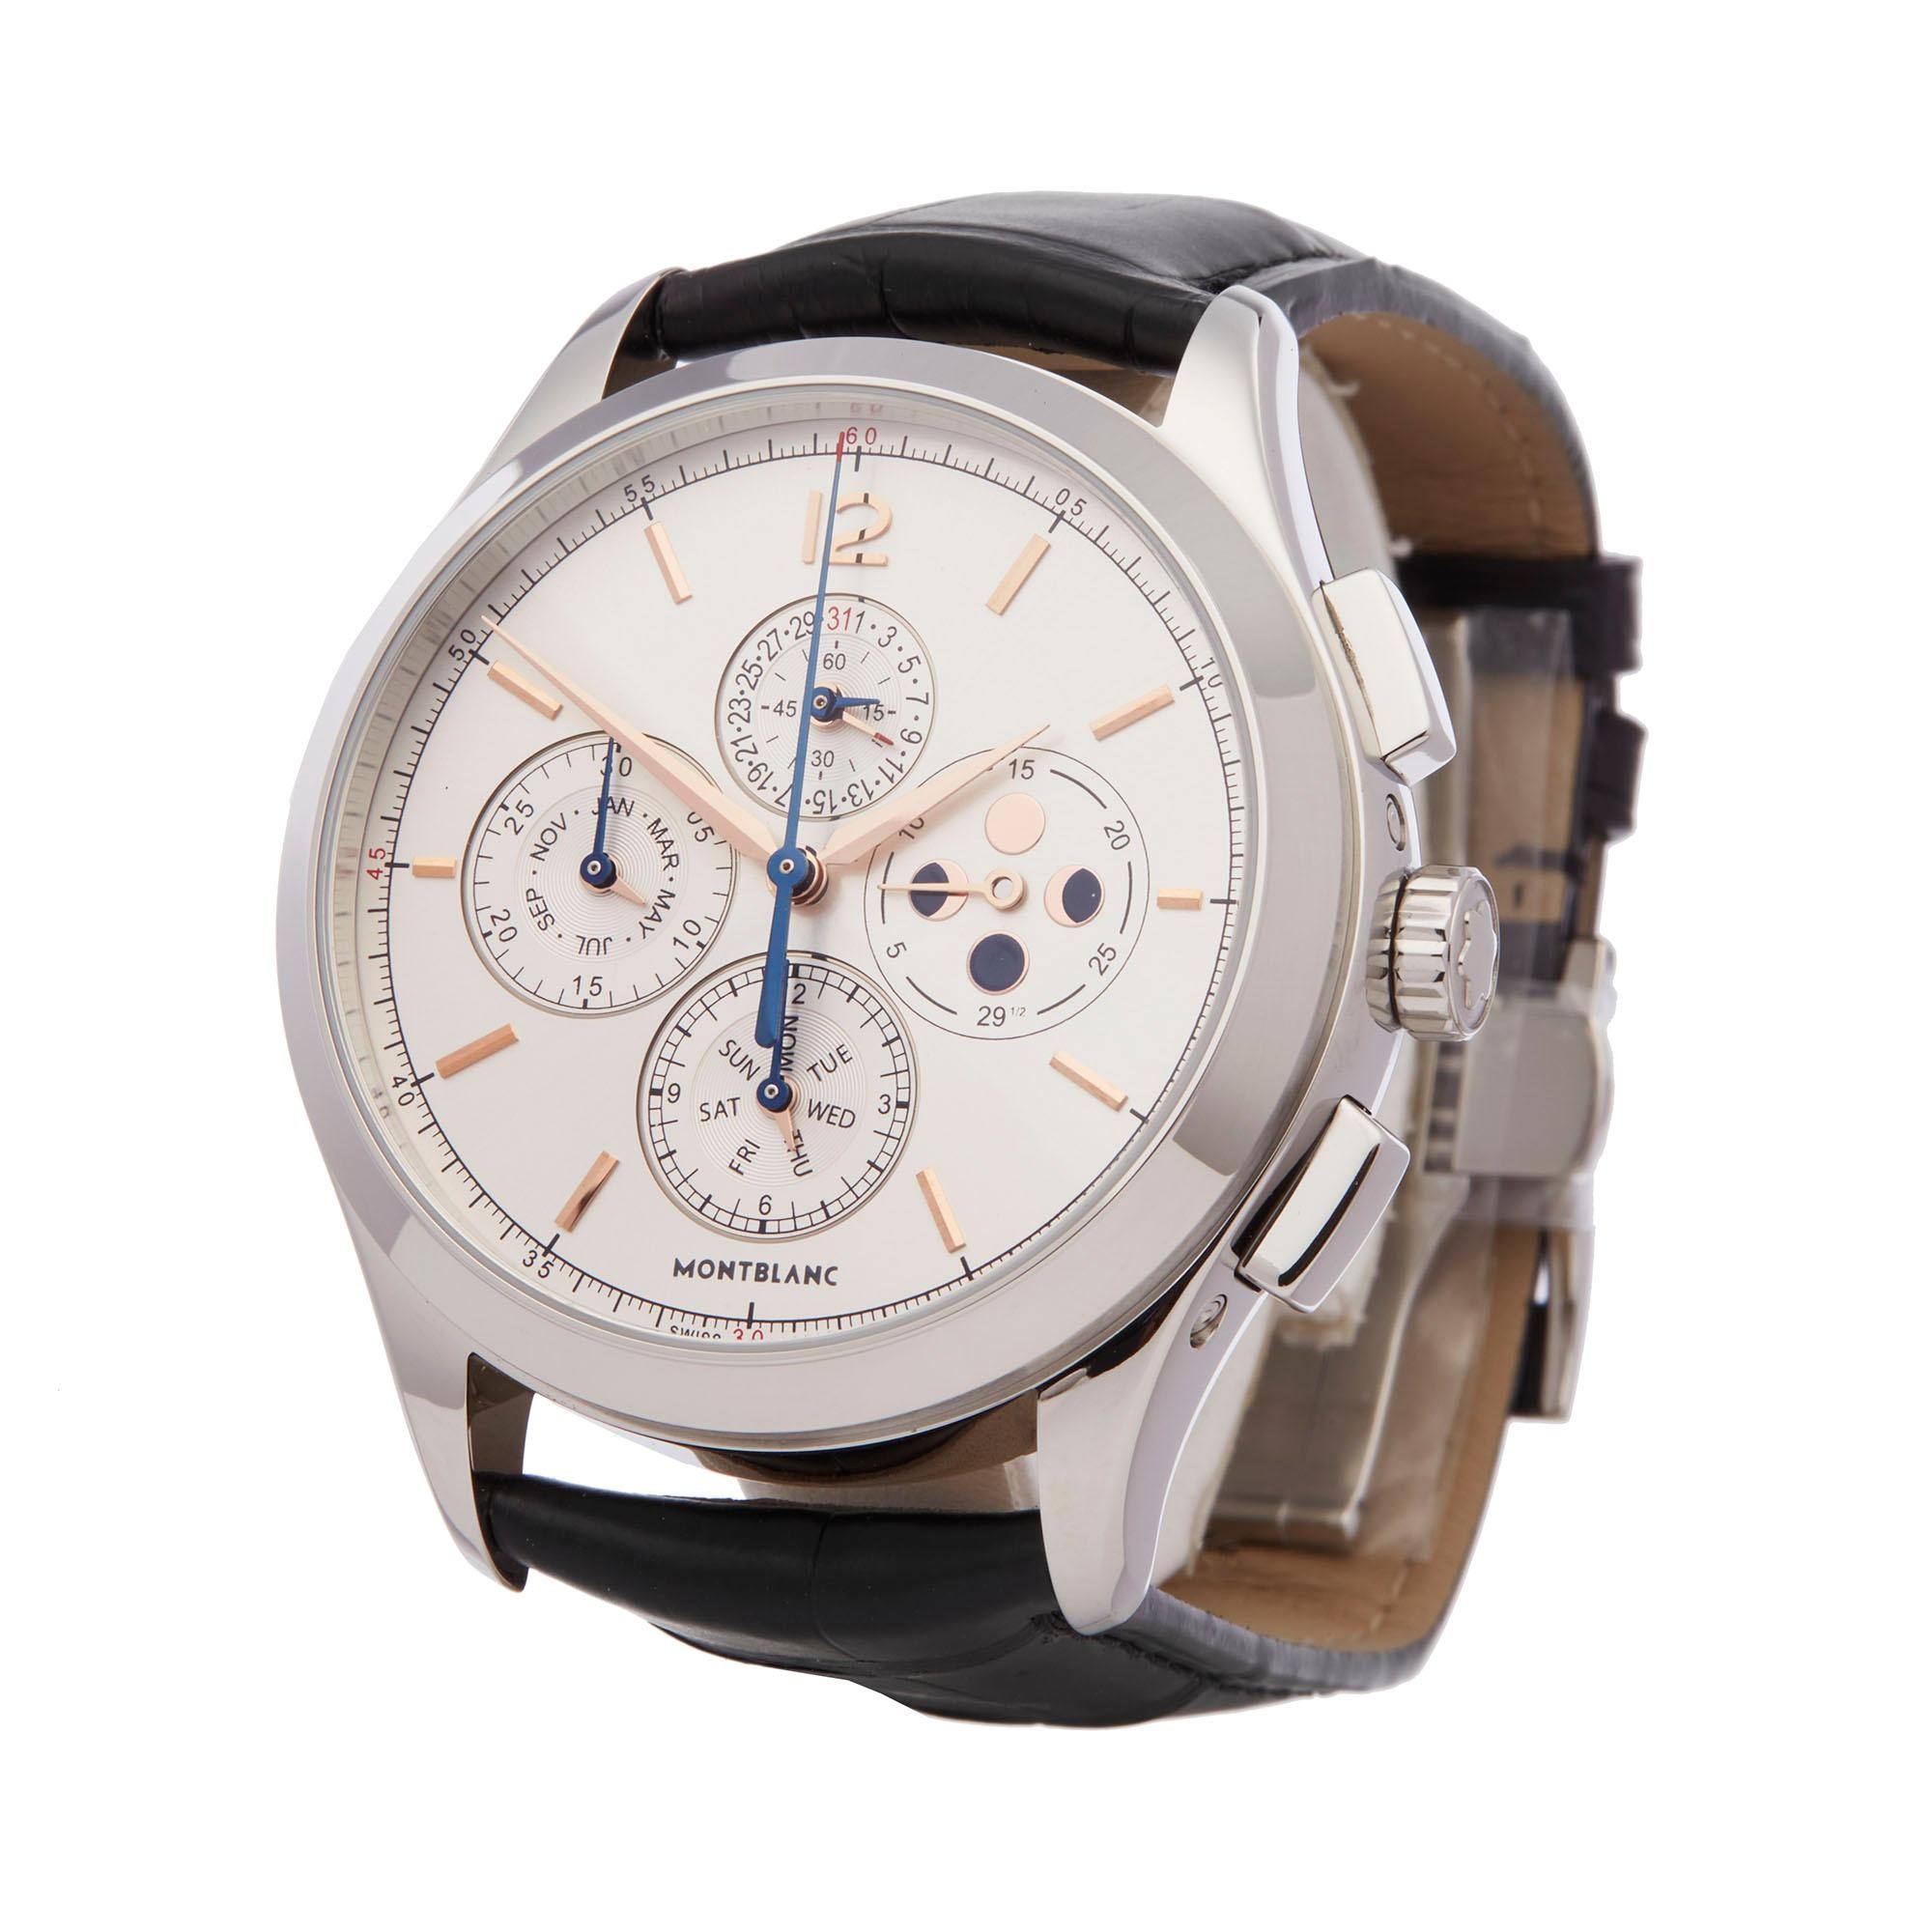 Ref: W6375
Manufacturer: Montblanc
Model: Heritage
Model Ref: 114875
Age: Circa 2019
Gender: Mens
Complete With: Box, Manuals, Open Guarantee & Pusher
Dial: Silver Baton
Glass: Sapphire Crystal
Movement: Automatic
Water Resistance: To Manufacturers